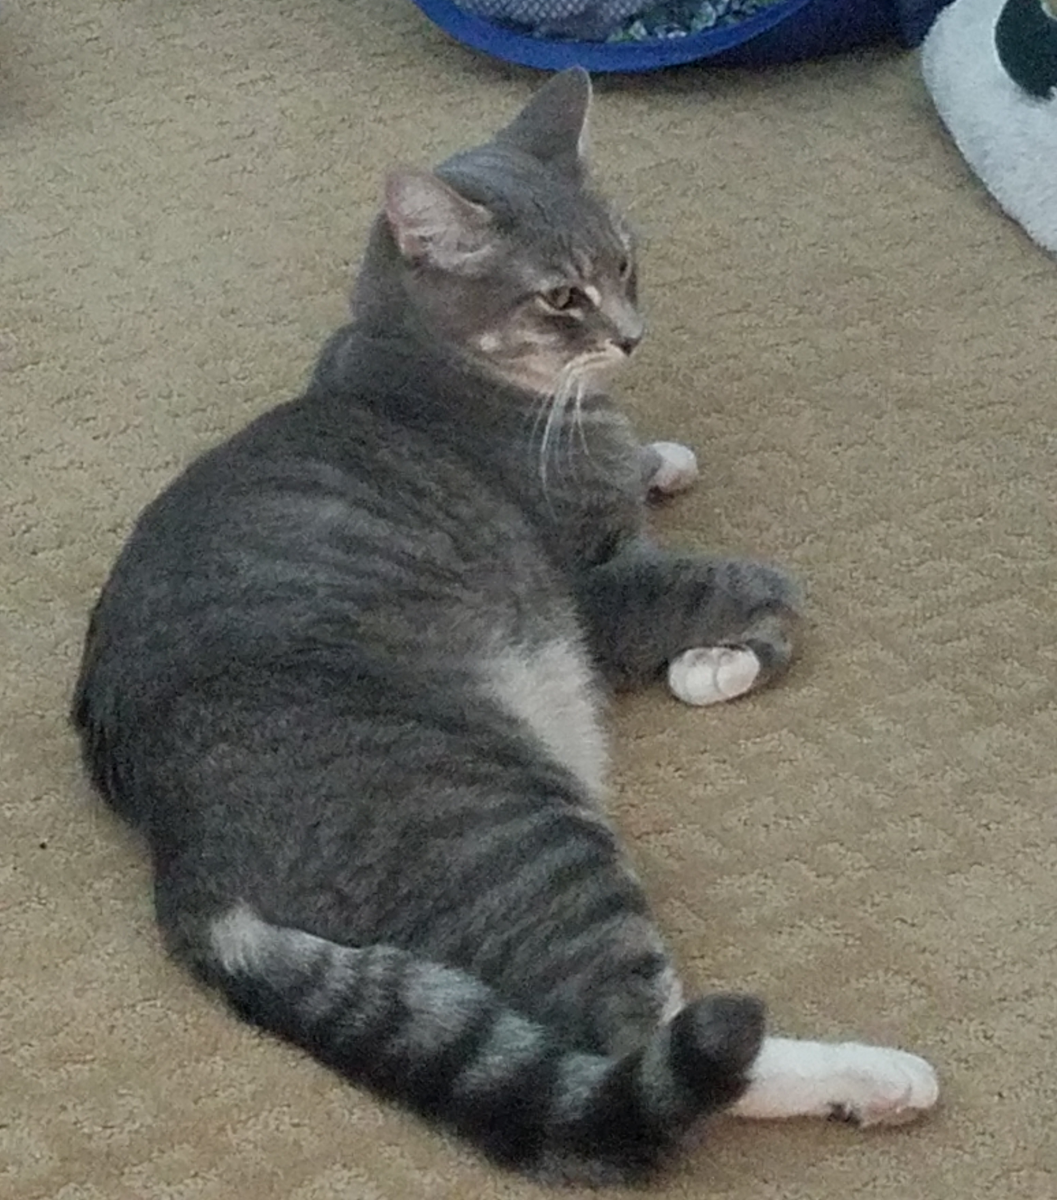 Image of Tubby / Tubbs, Lost Cat